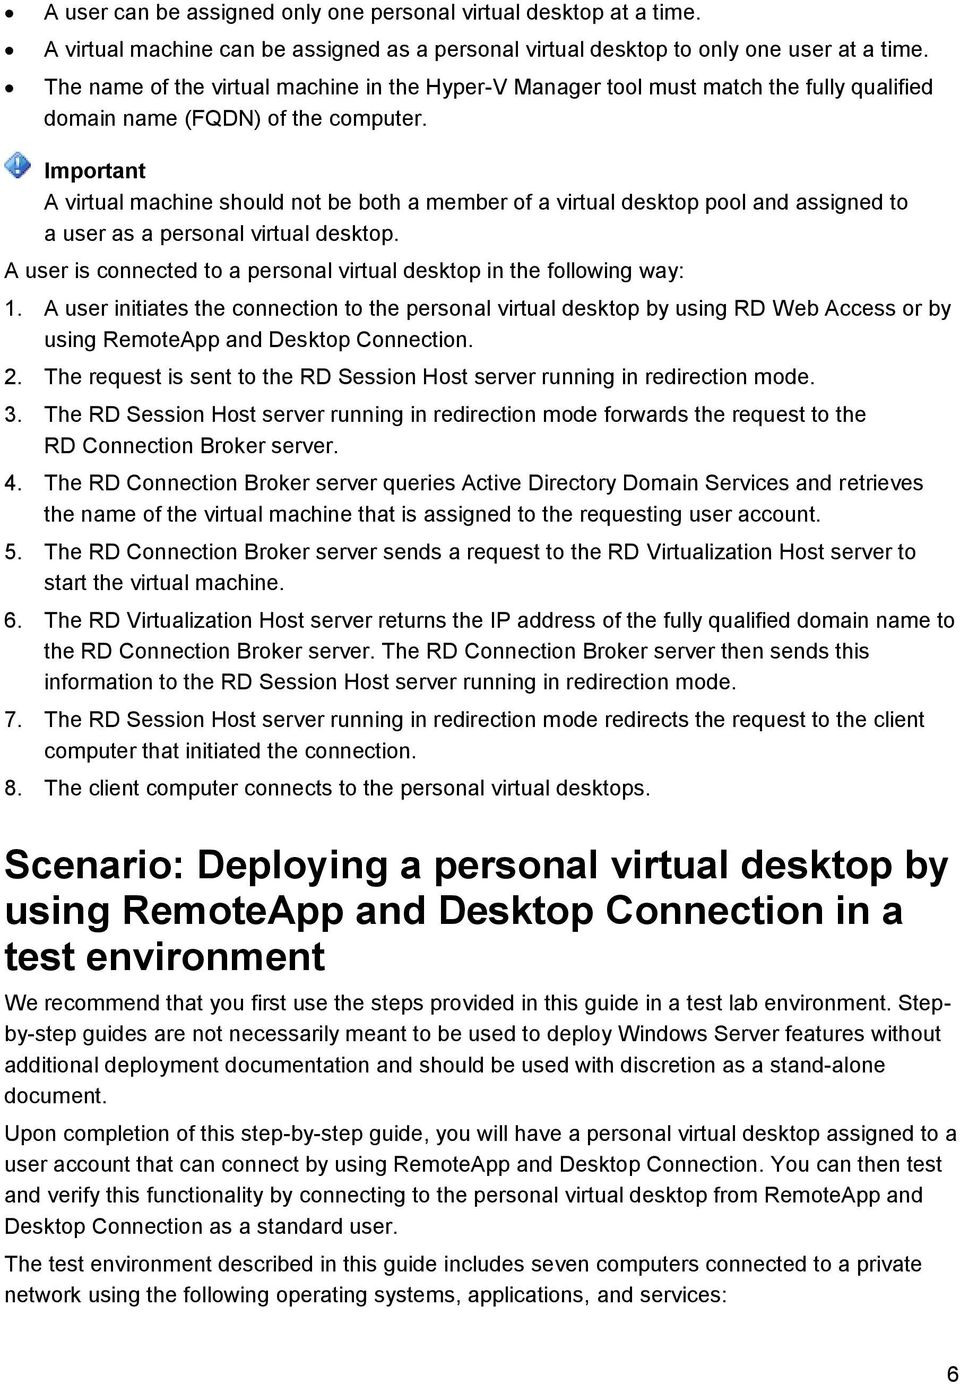 Important A virtual machine should not be both a member of a virtual desktop pool and assigned to a user as a personal virtual desktop.